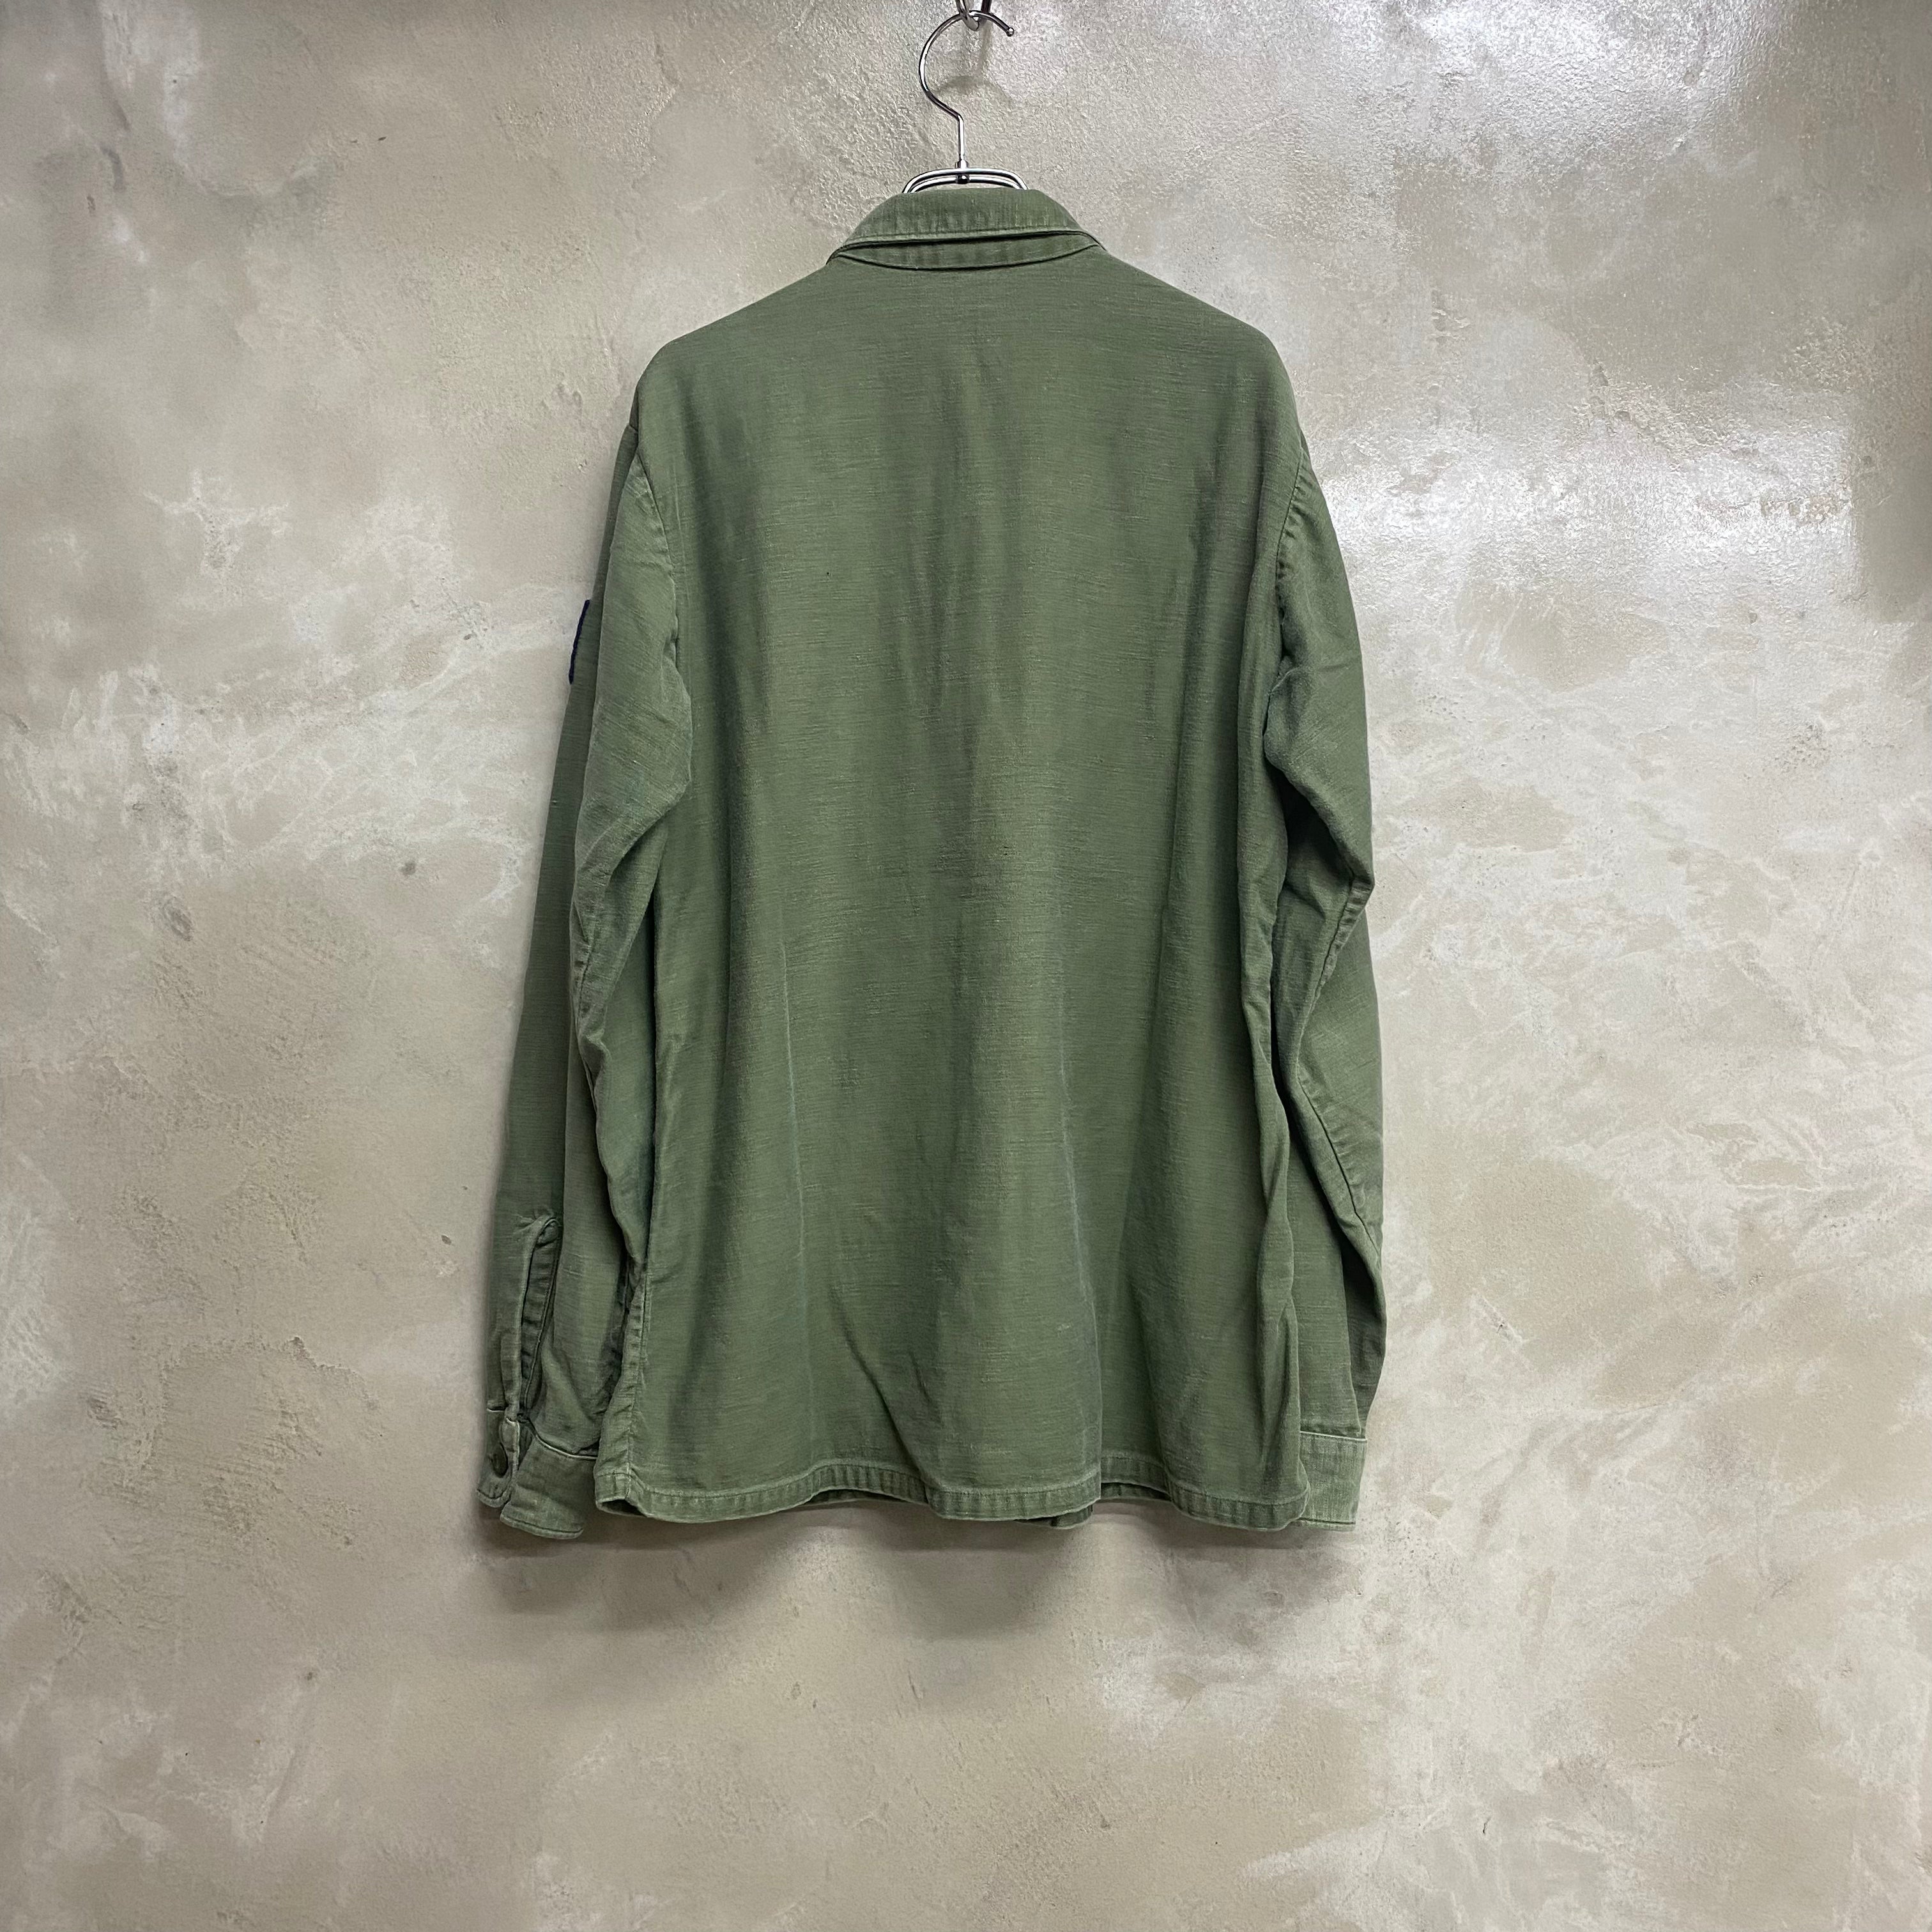 [ ONLY ONE ! ] US ARMED FORCES '69 UTILITY SHIRT / Mr.Clean Select